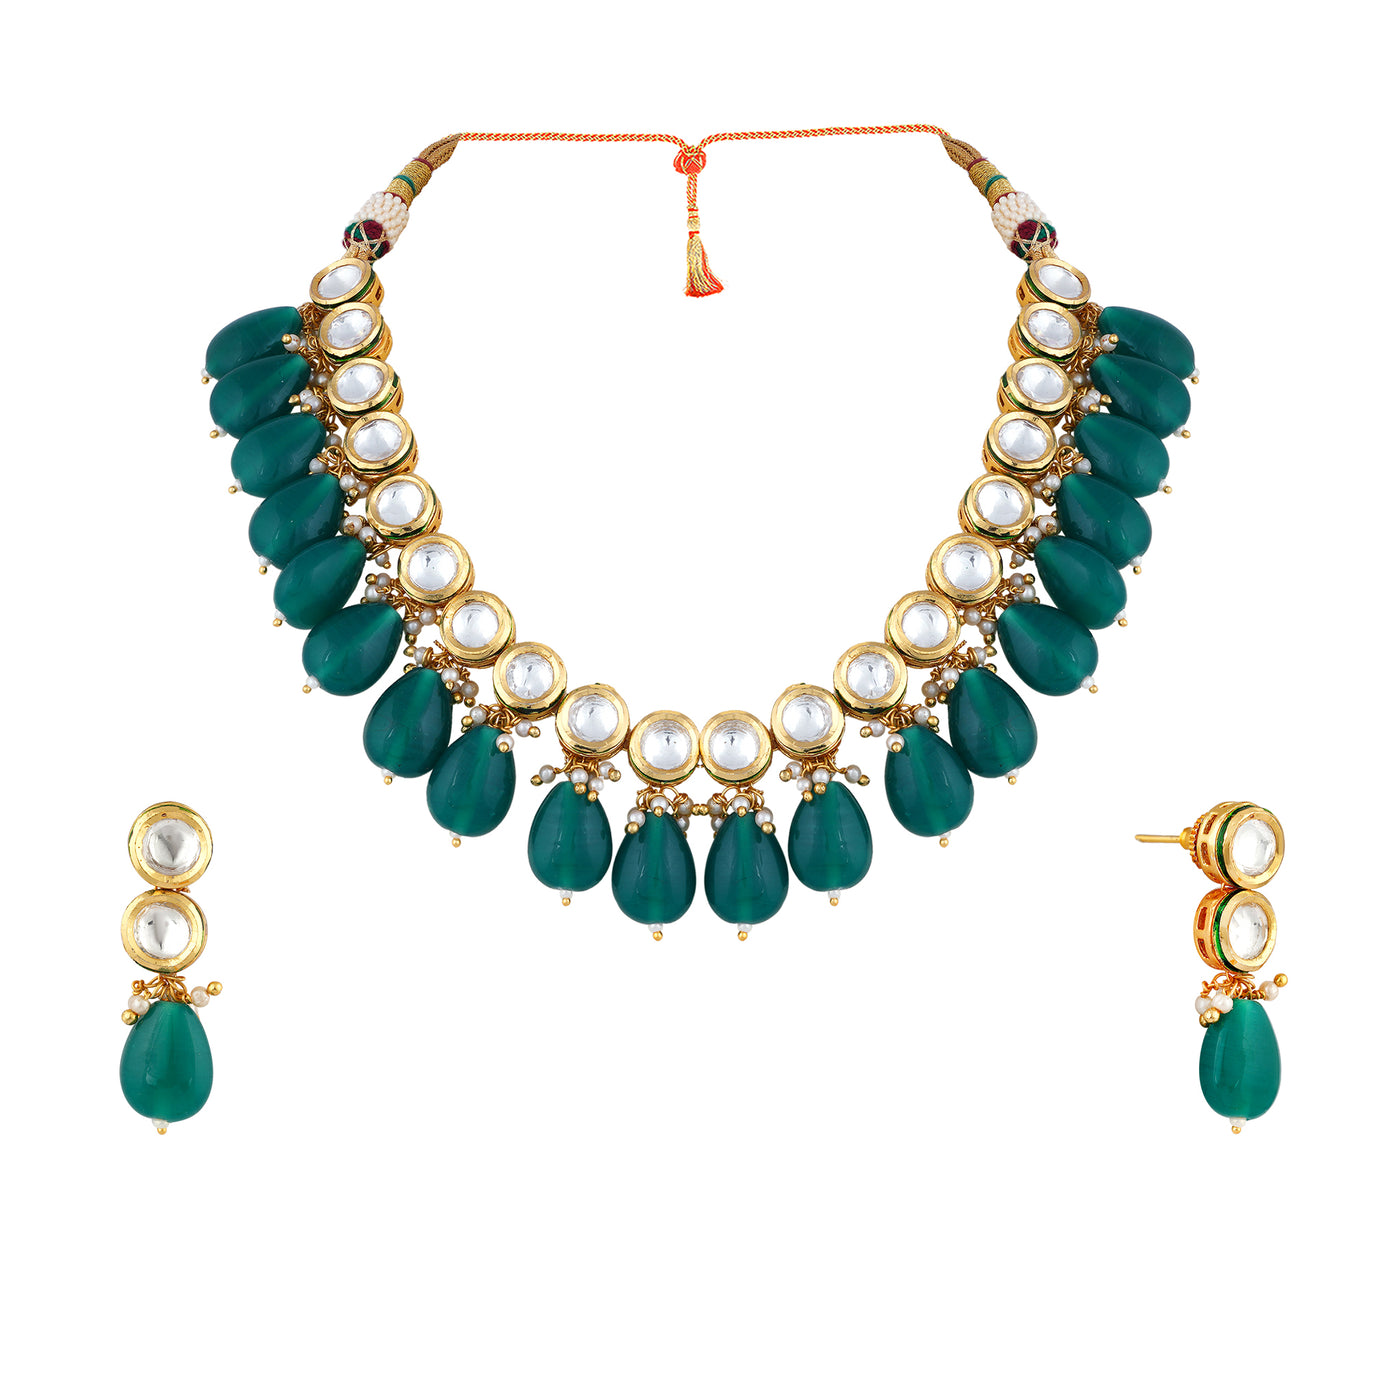 Gold plated simple kundan choker necklace set with matching earrings.